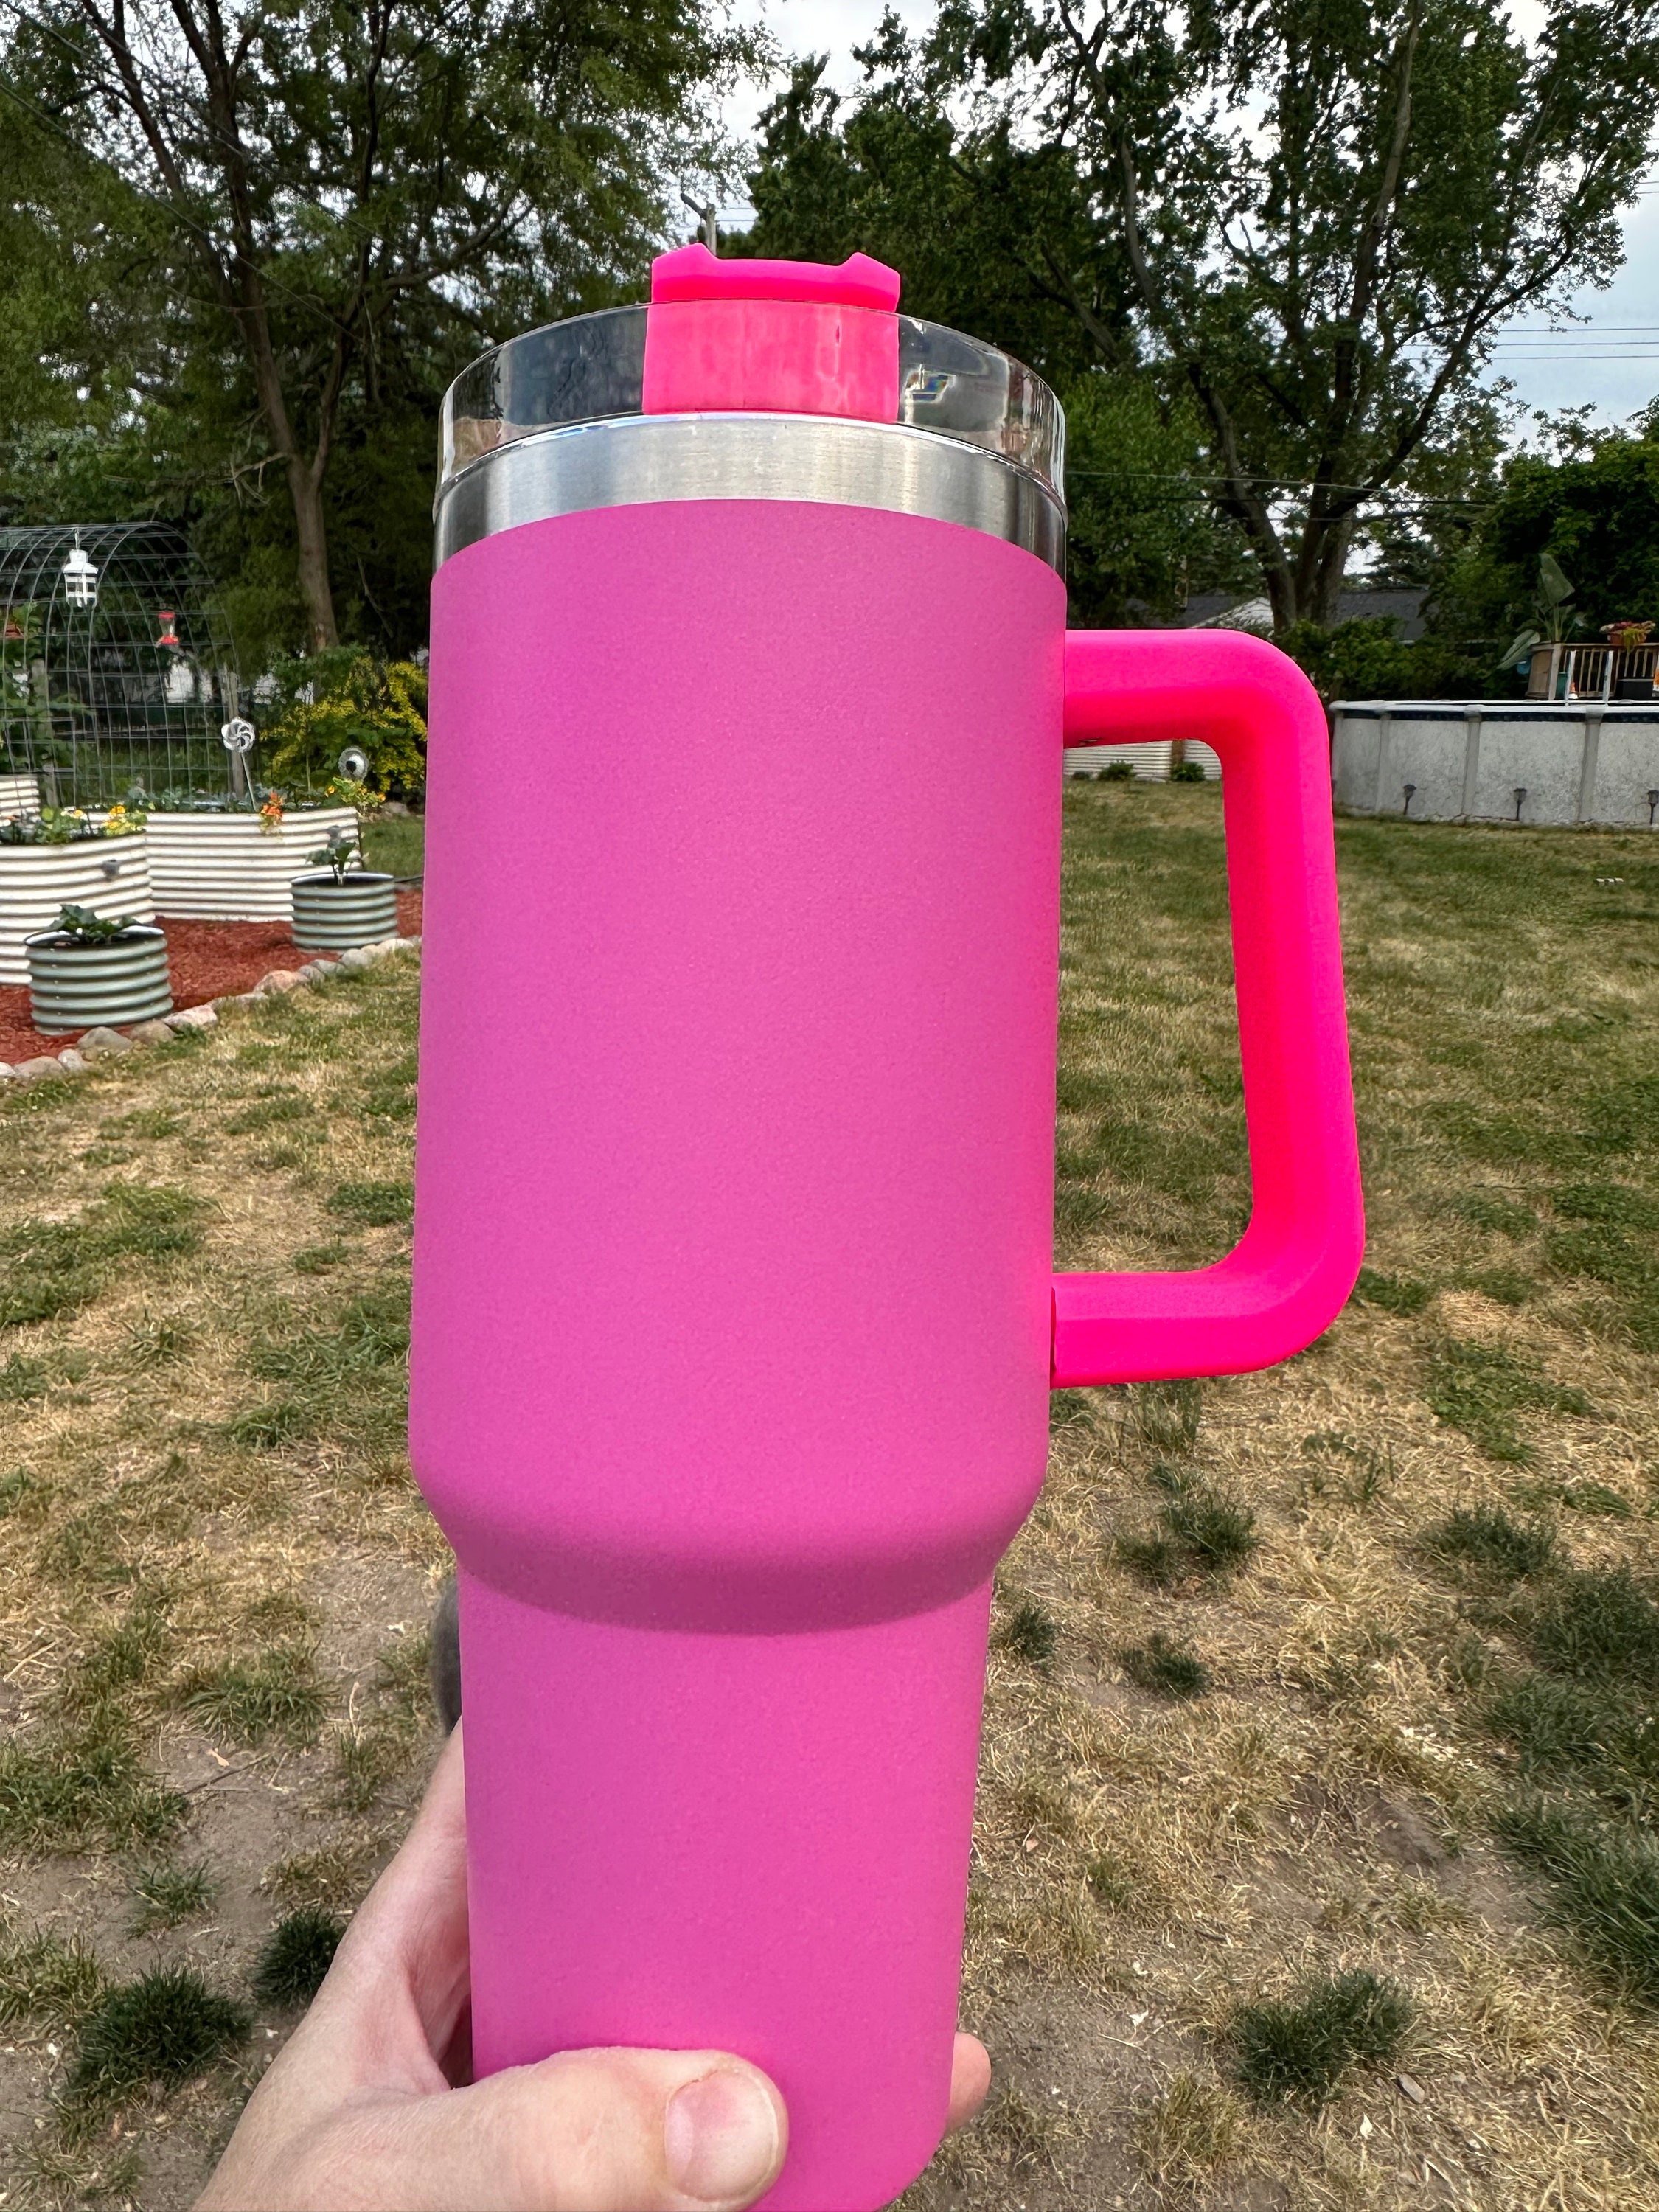 Pink Epoxy Mixer - Cup Turner Accessory - Resin Mixer